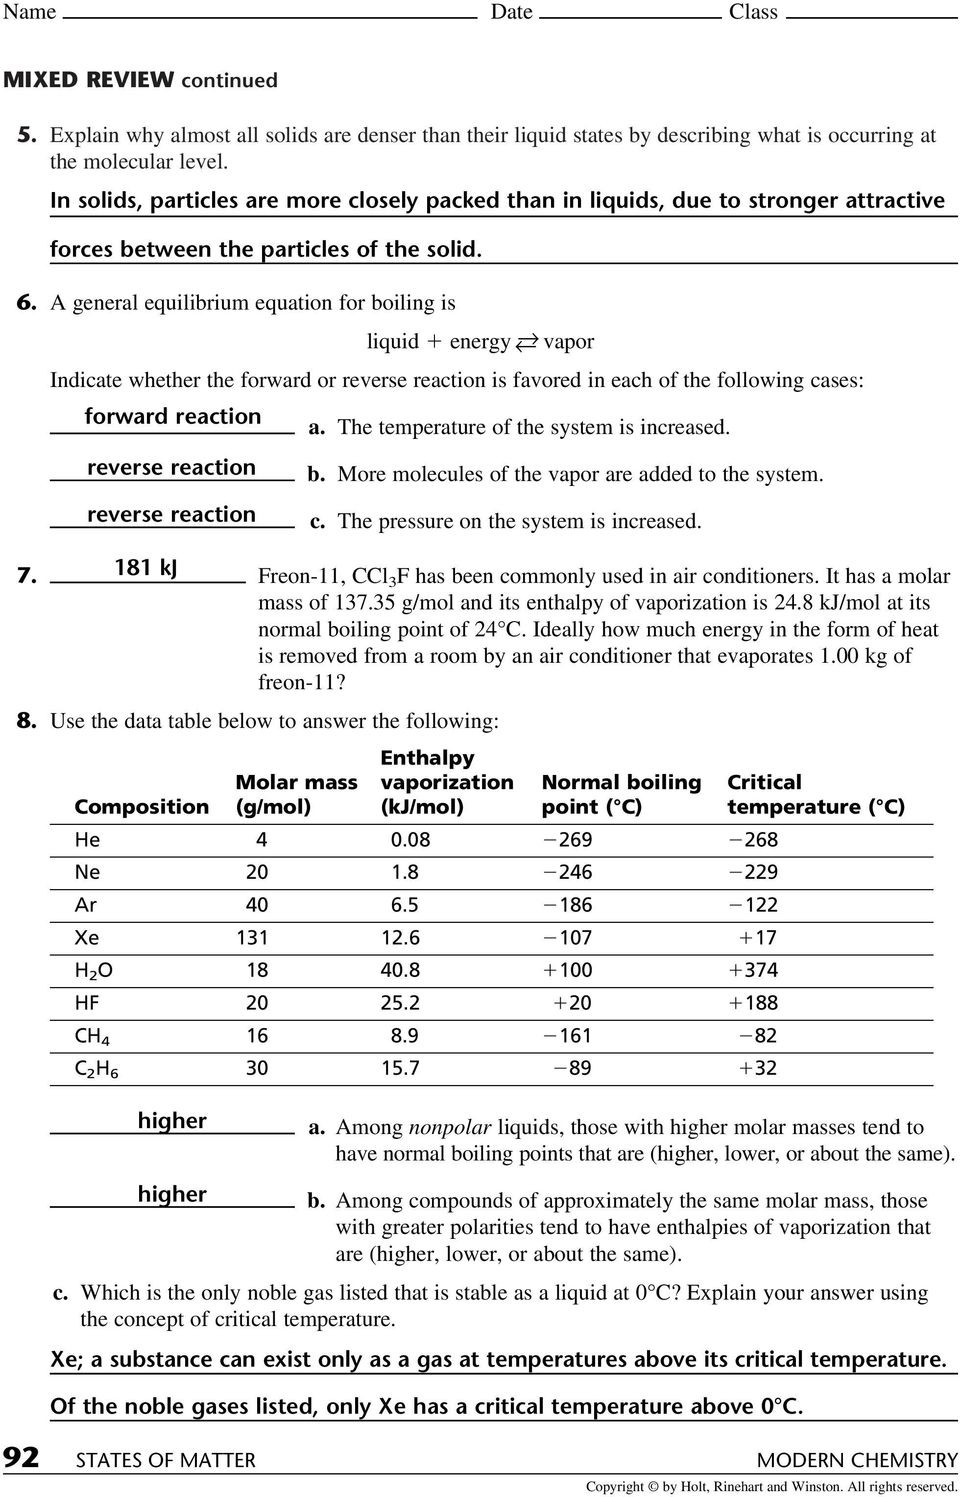 States Of Matter Worksheet Chemistry States Of Matter Chapter 10 Review Section 1 Name Date